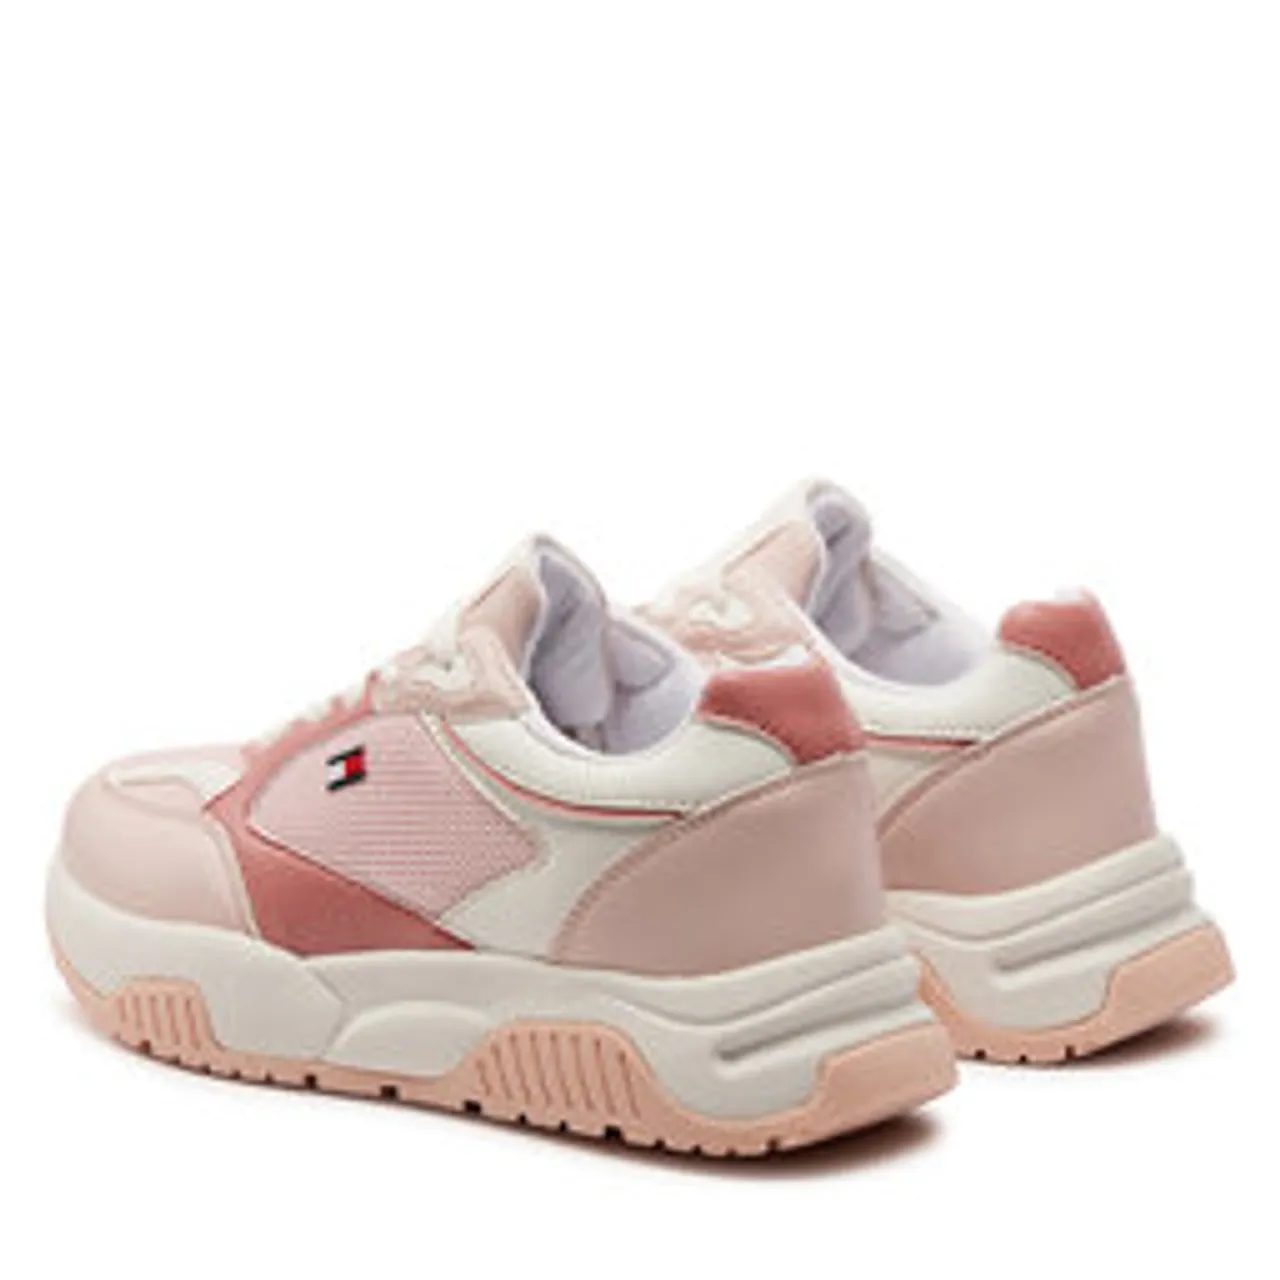 Sneakers Tommy Hilfiger T3A9-33219-1695 Rosa/Bianco X054